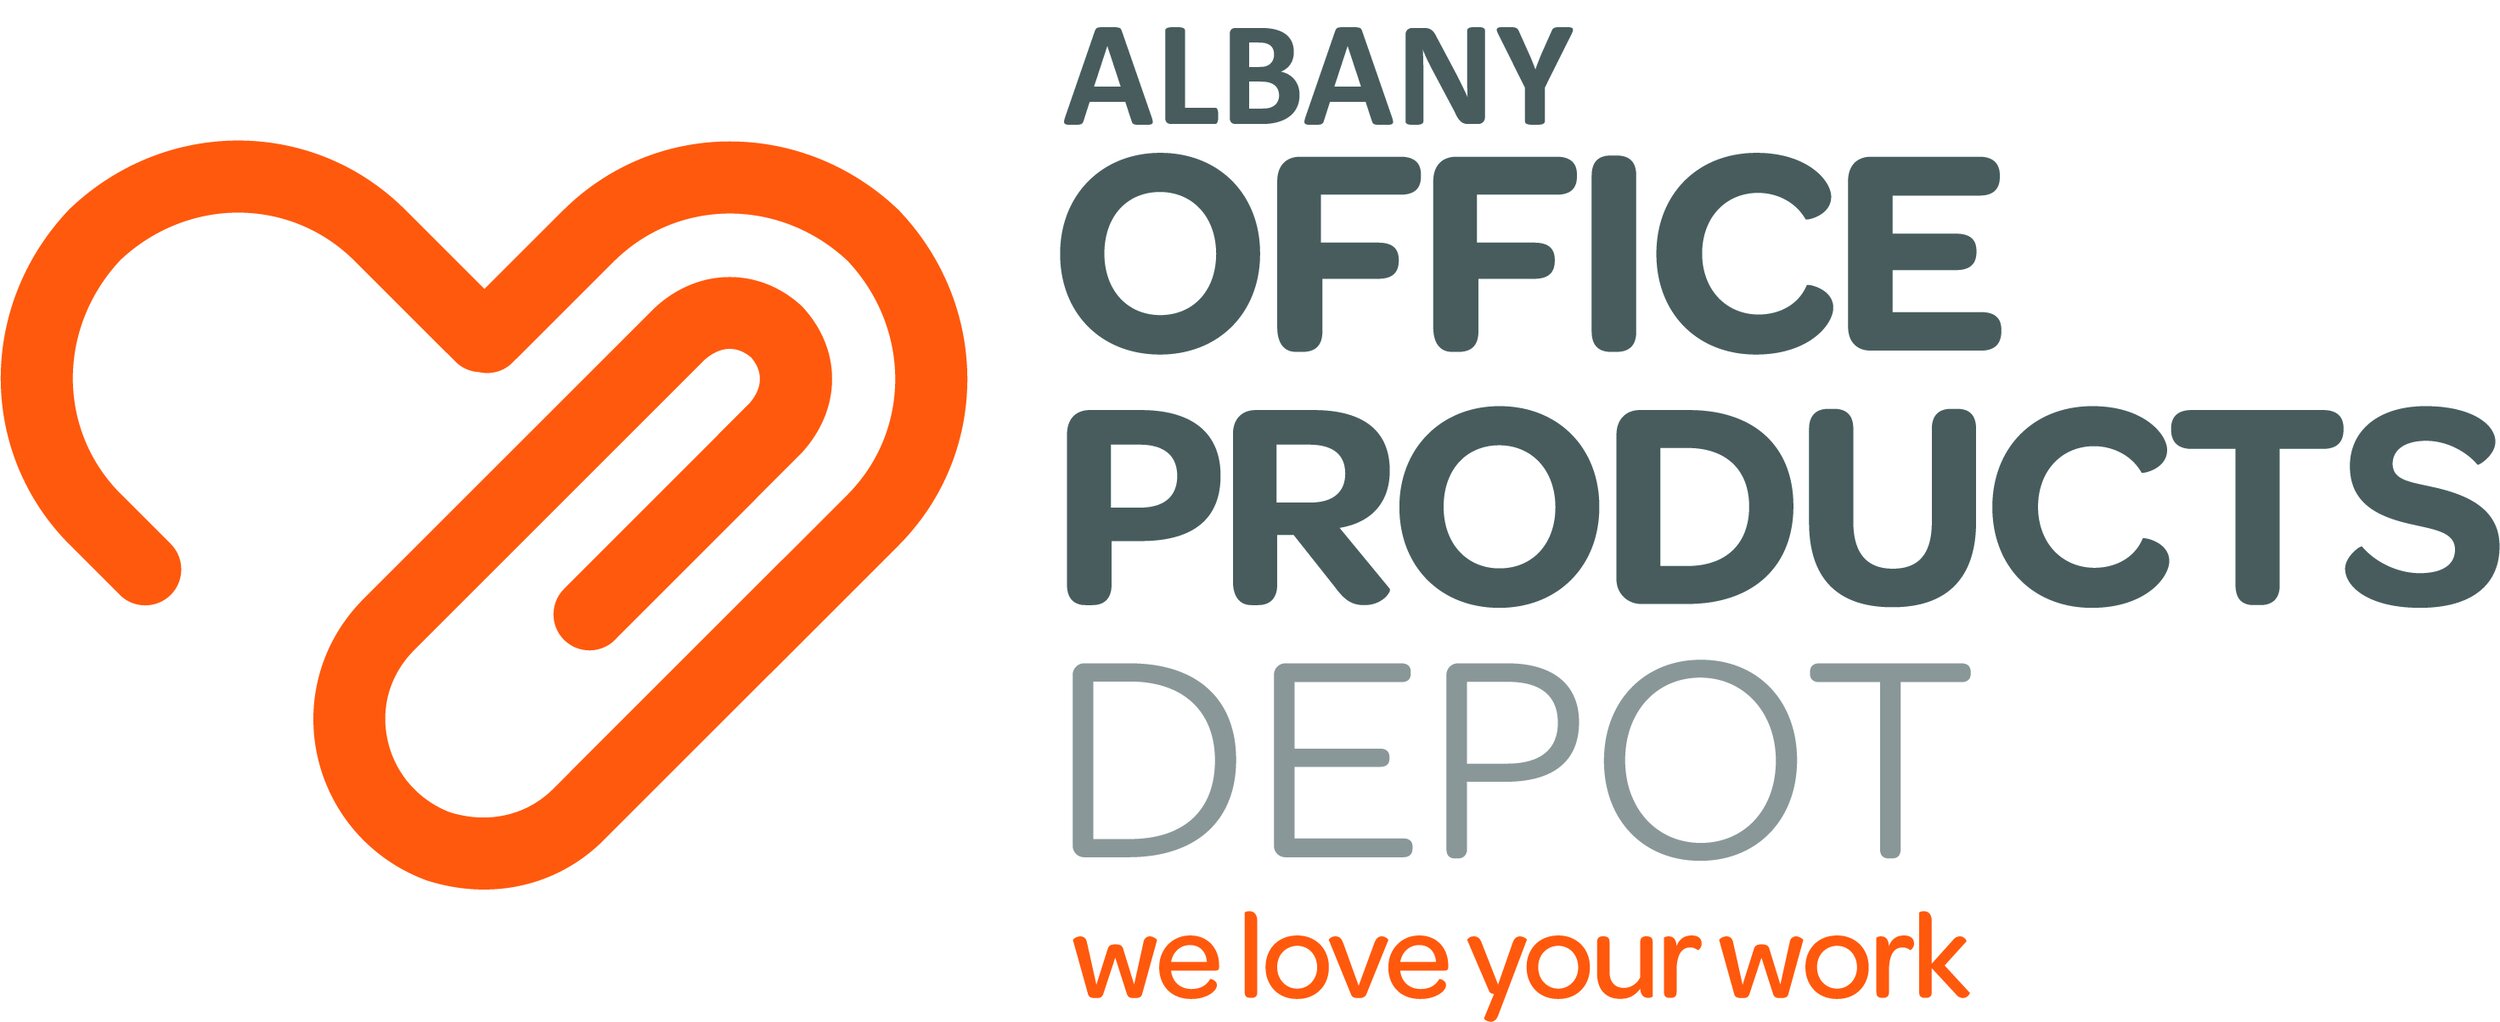 Copy of OPD ALBANY LOGO - SHORT WITH TAGLINE.jpg